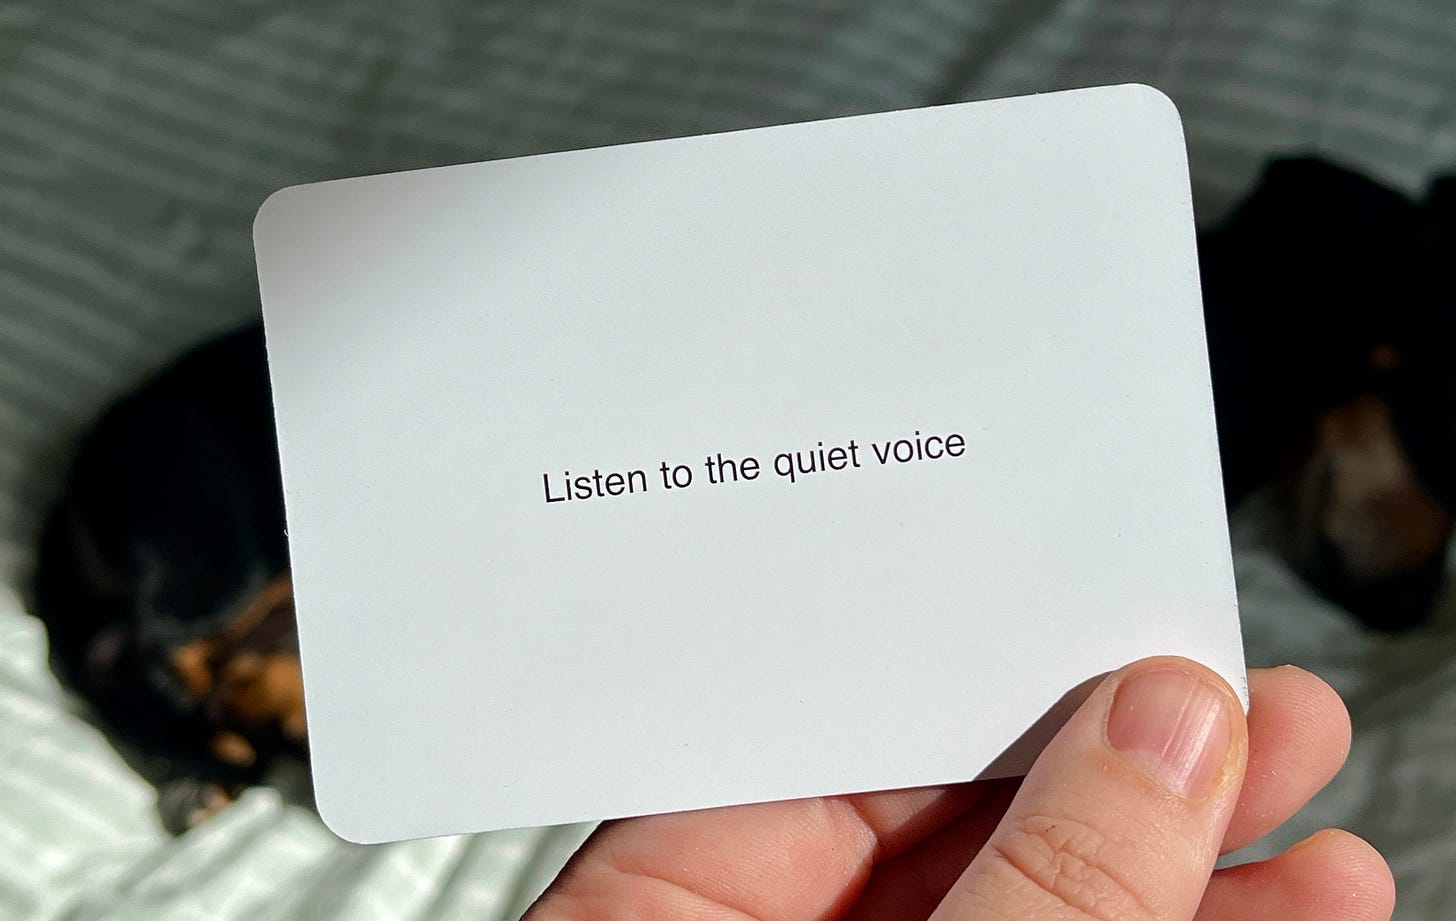 a hand holds a white card with black text reading "listen to the quiet voice", while a blurry dachshund rests in the background